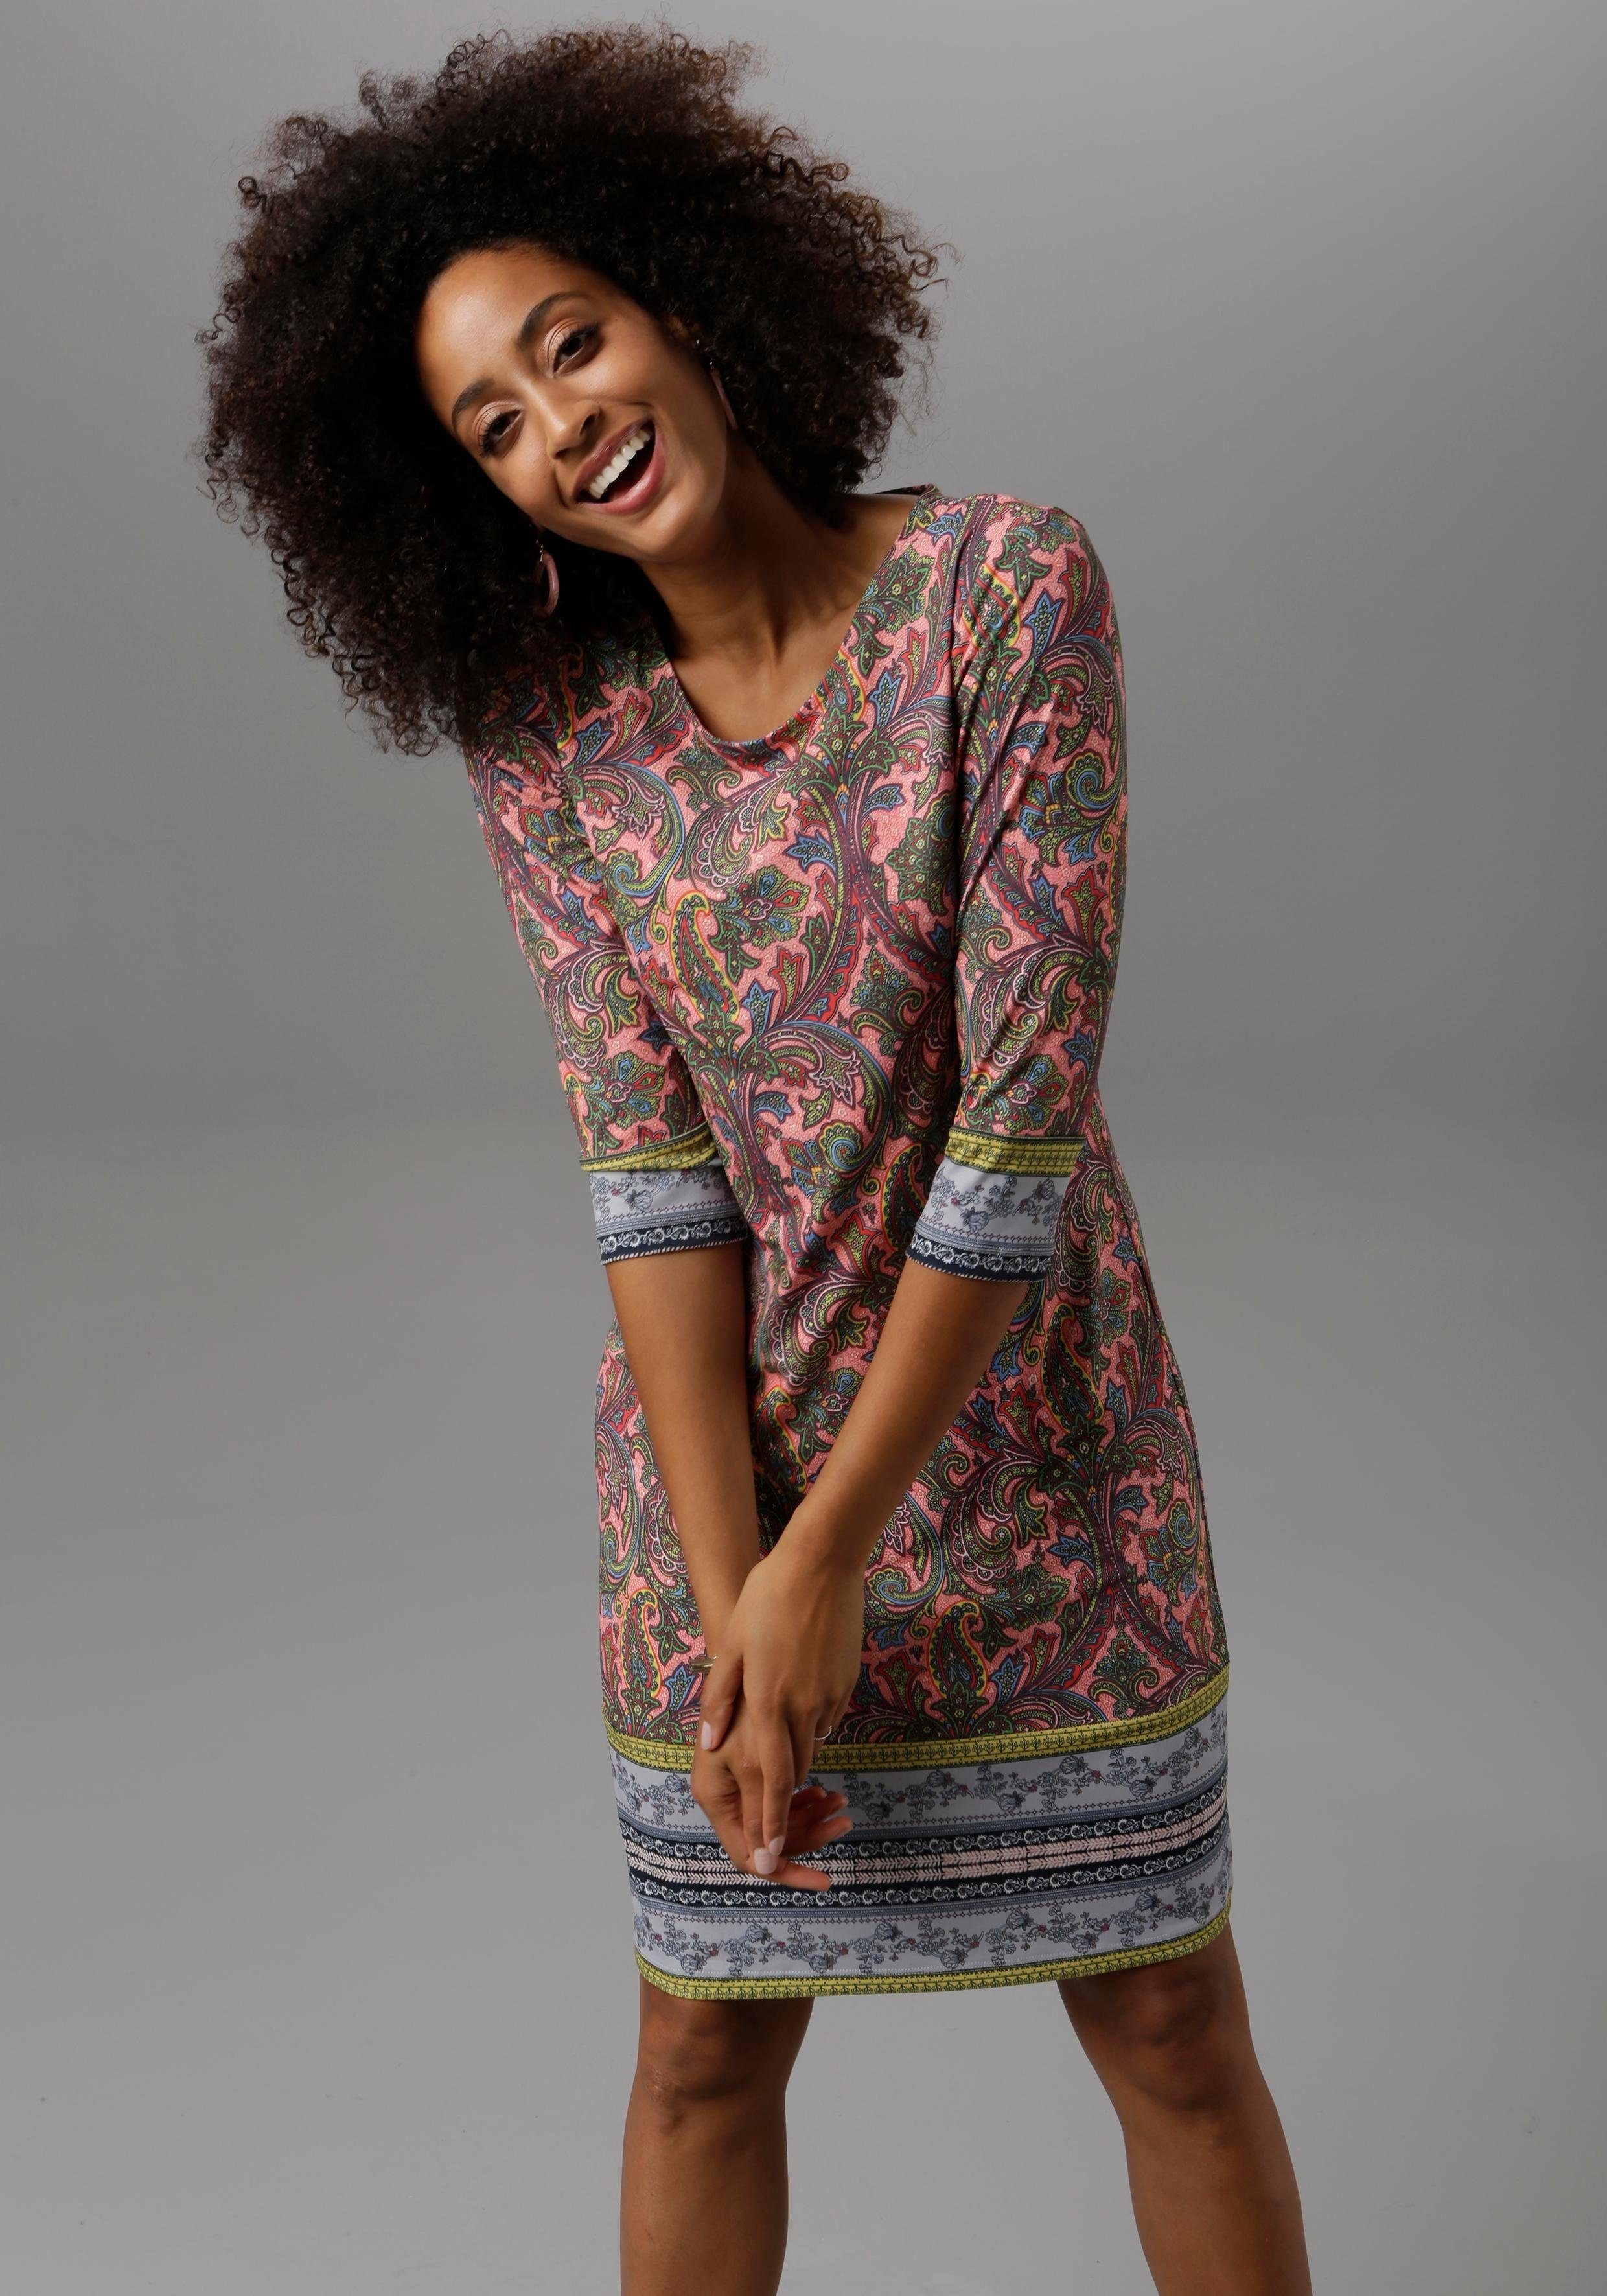 Muster SELECTED Aniston Jerseykleid mit farbenfrohem